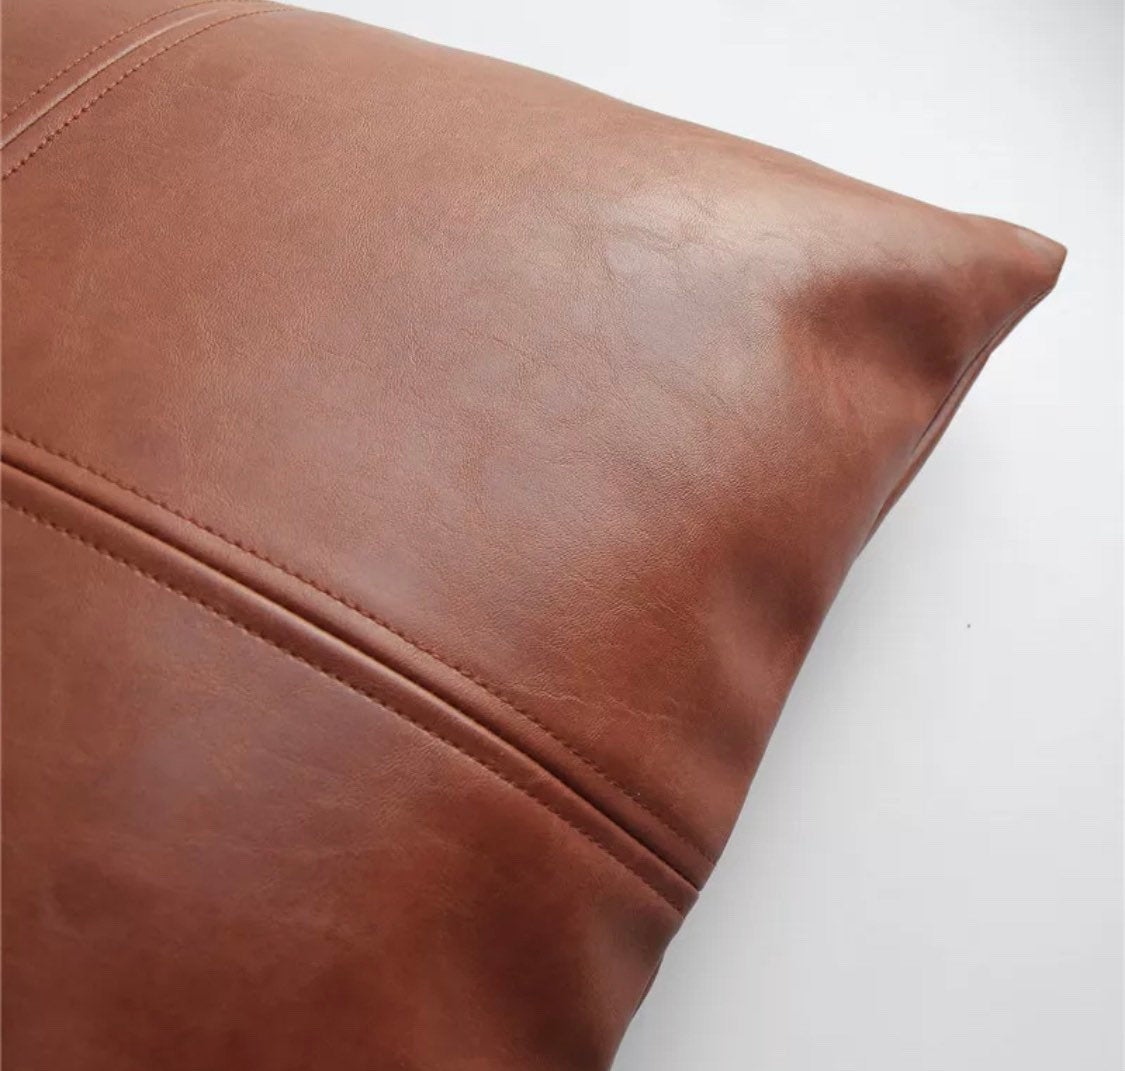 Vegan Leather Pillow Cover, Faux leather throw pillow cover